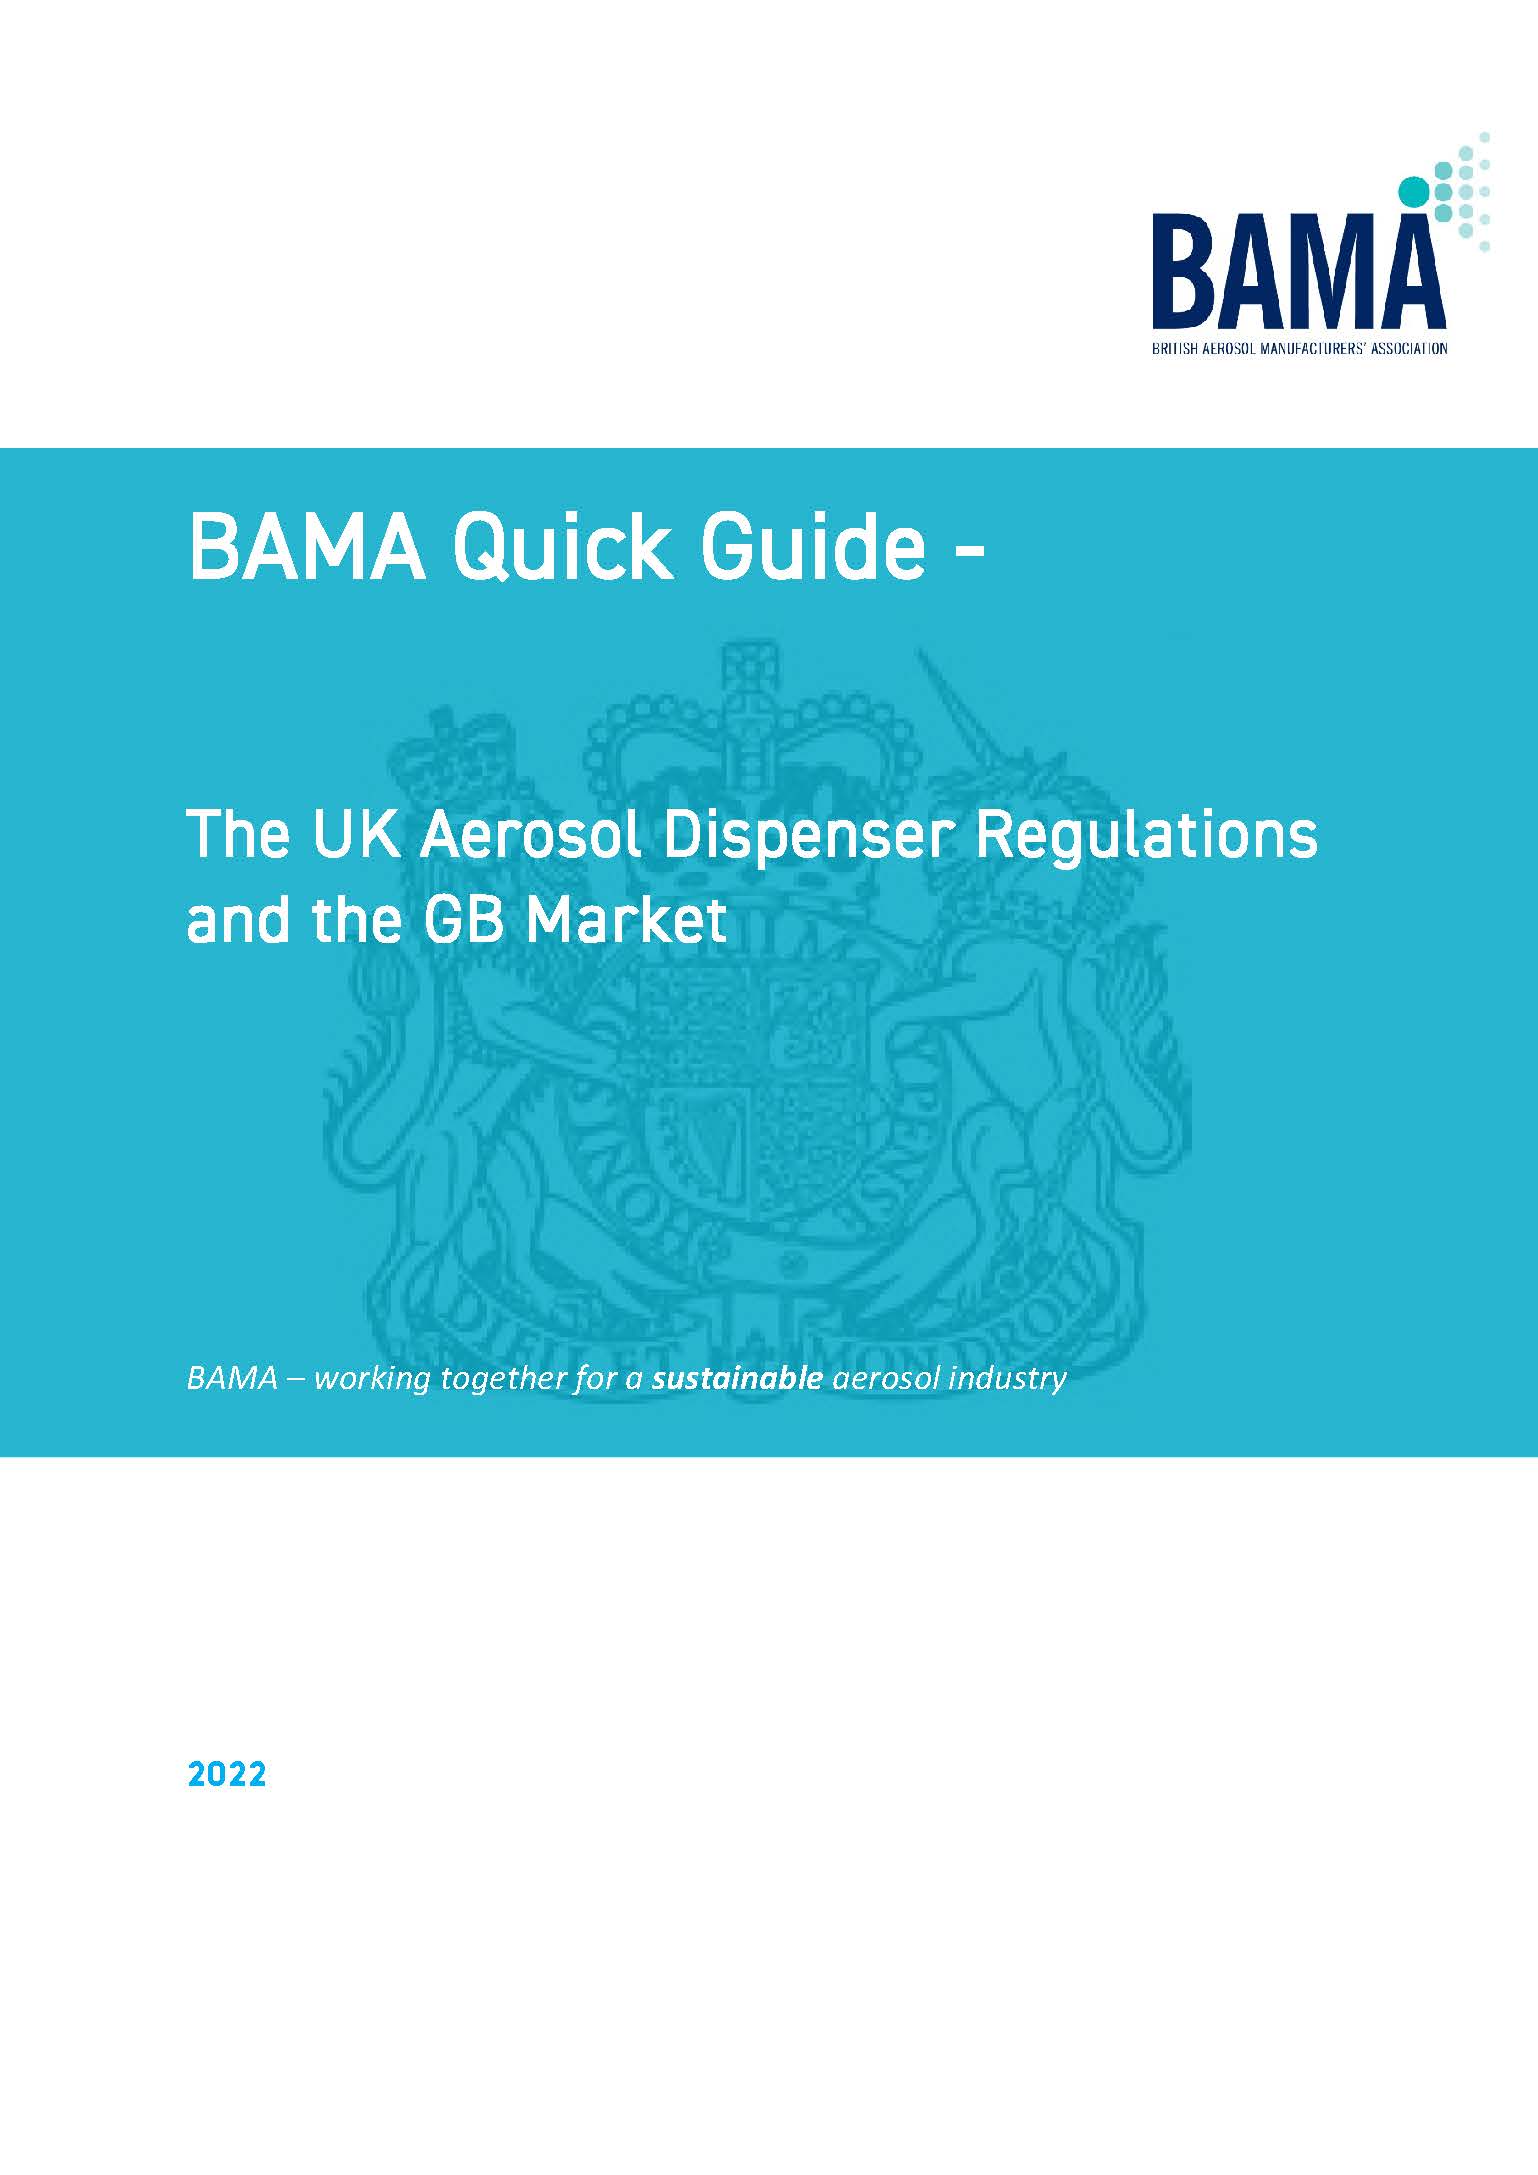 Quick Guide to the UK Aerosol Dispensers Regulations and the GB Market